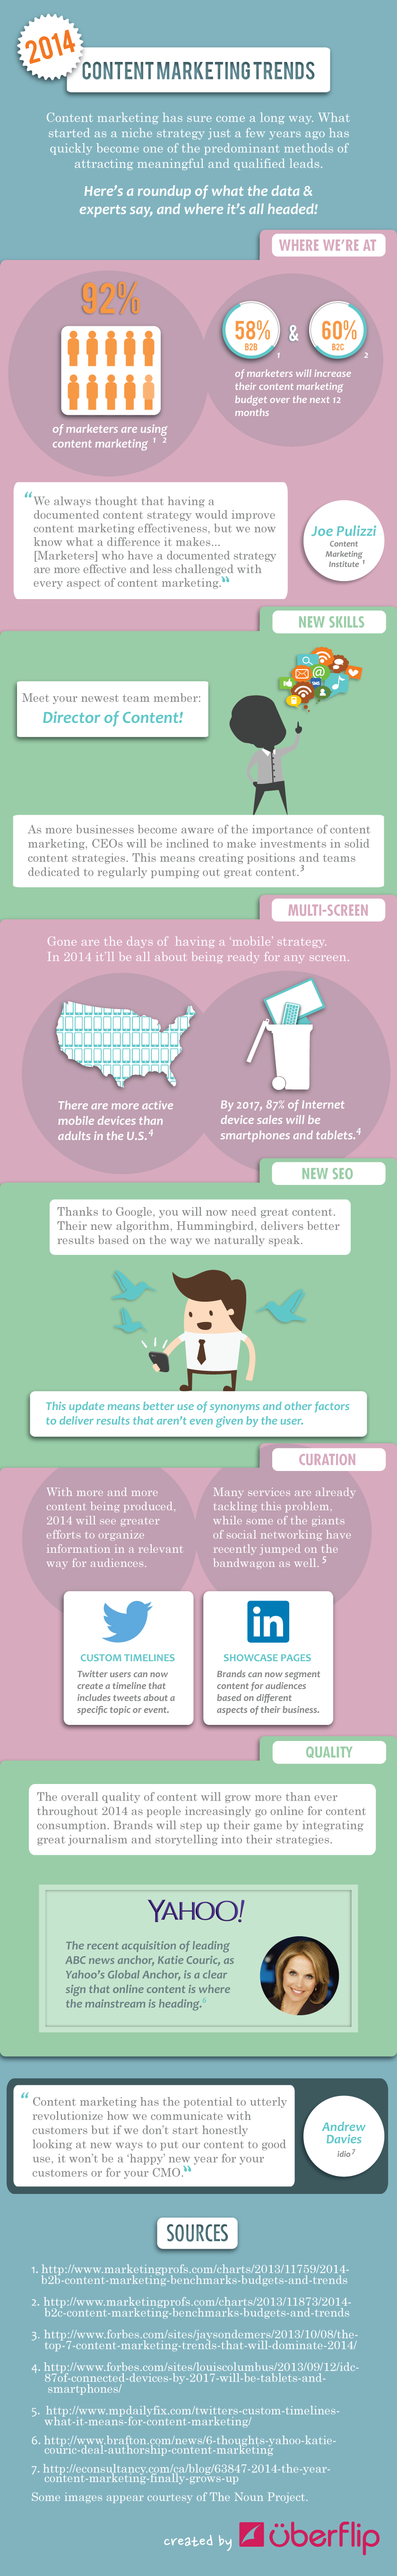 Infographic Content Marketing